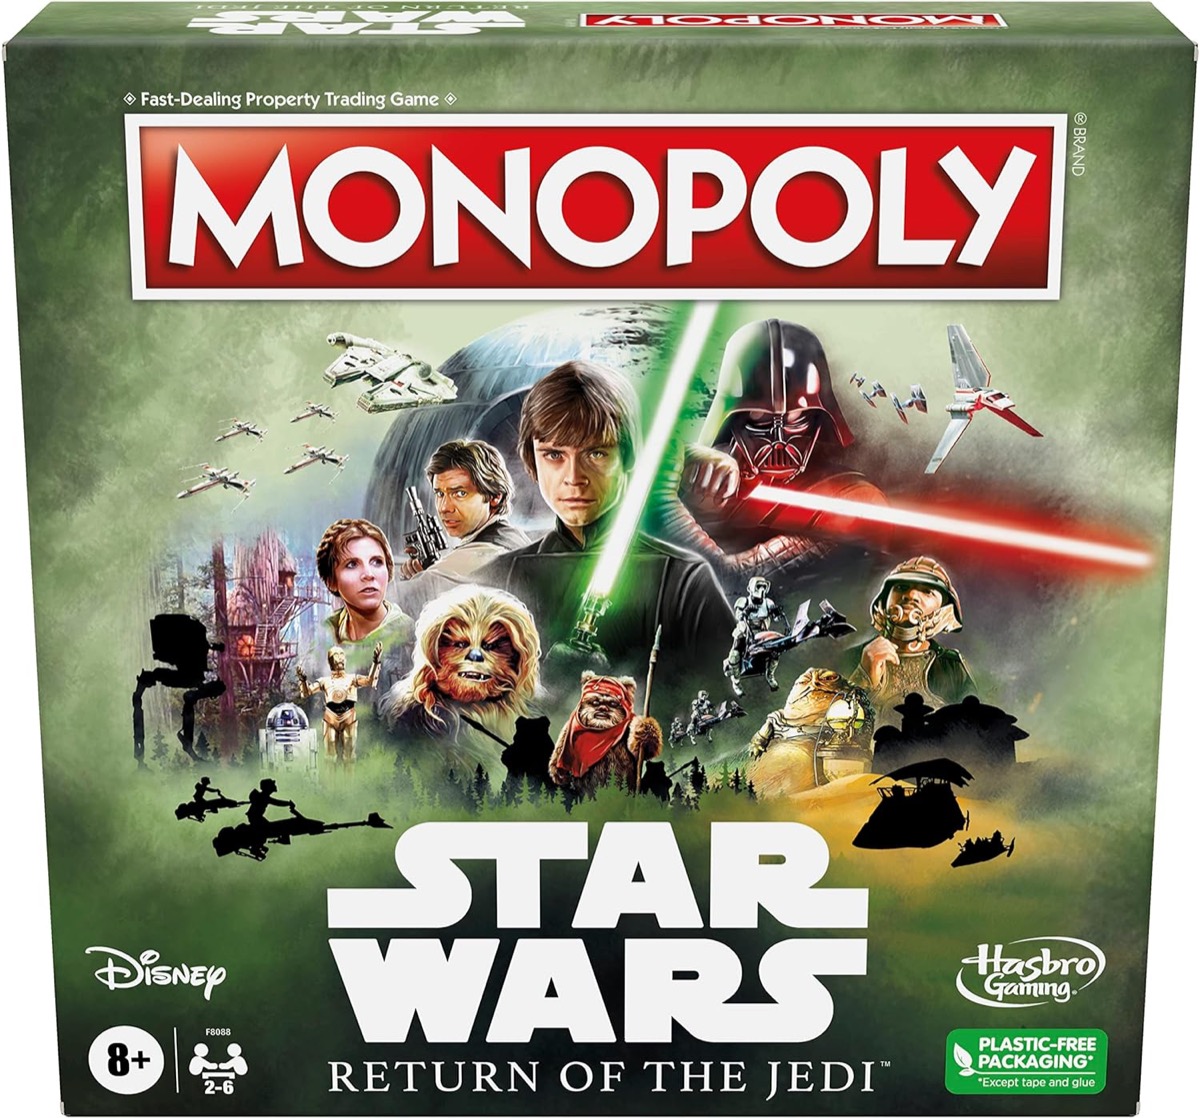 Box art for Return of the Jedi monopoly featuring Starr Wars heroes and villains